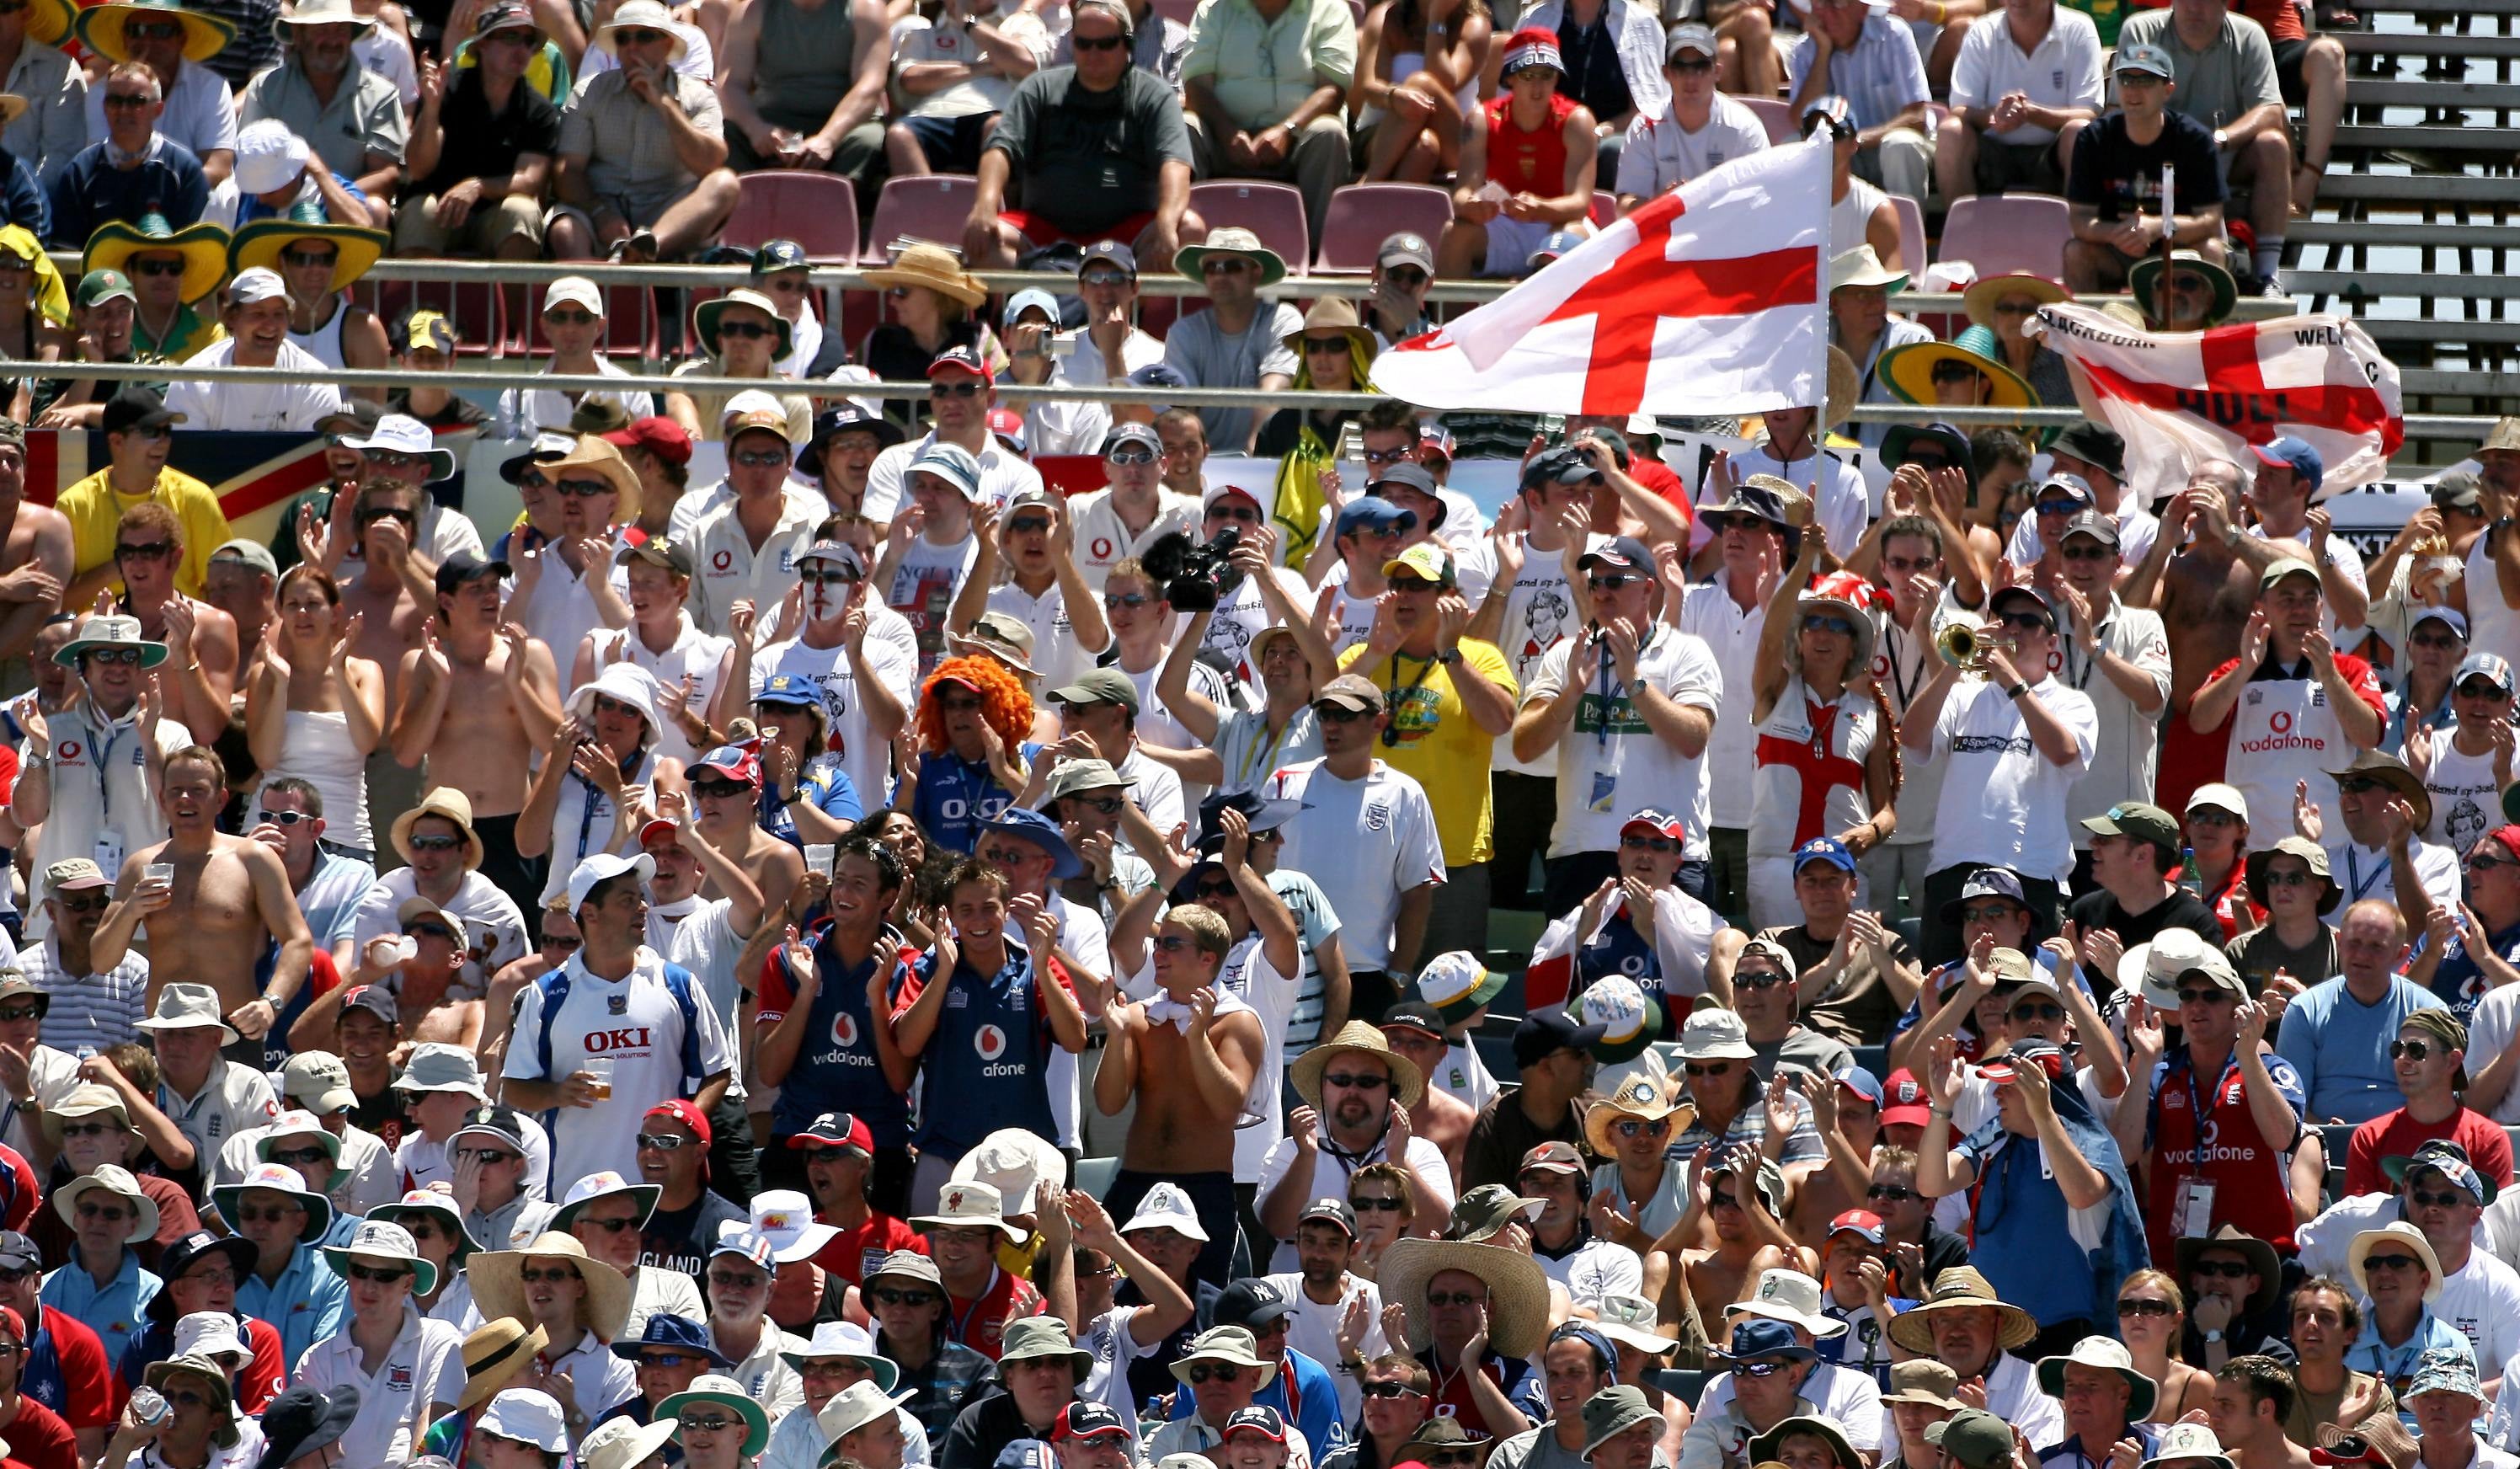 England’s Barmy Army vowed to make up for lost time at the T20 World Cup (Gareth Copley/PA)